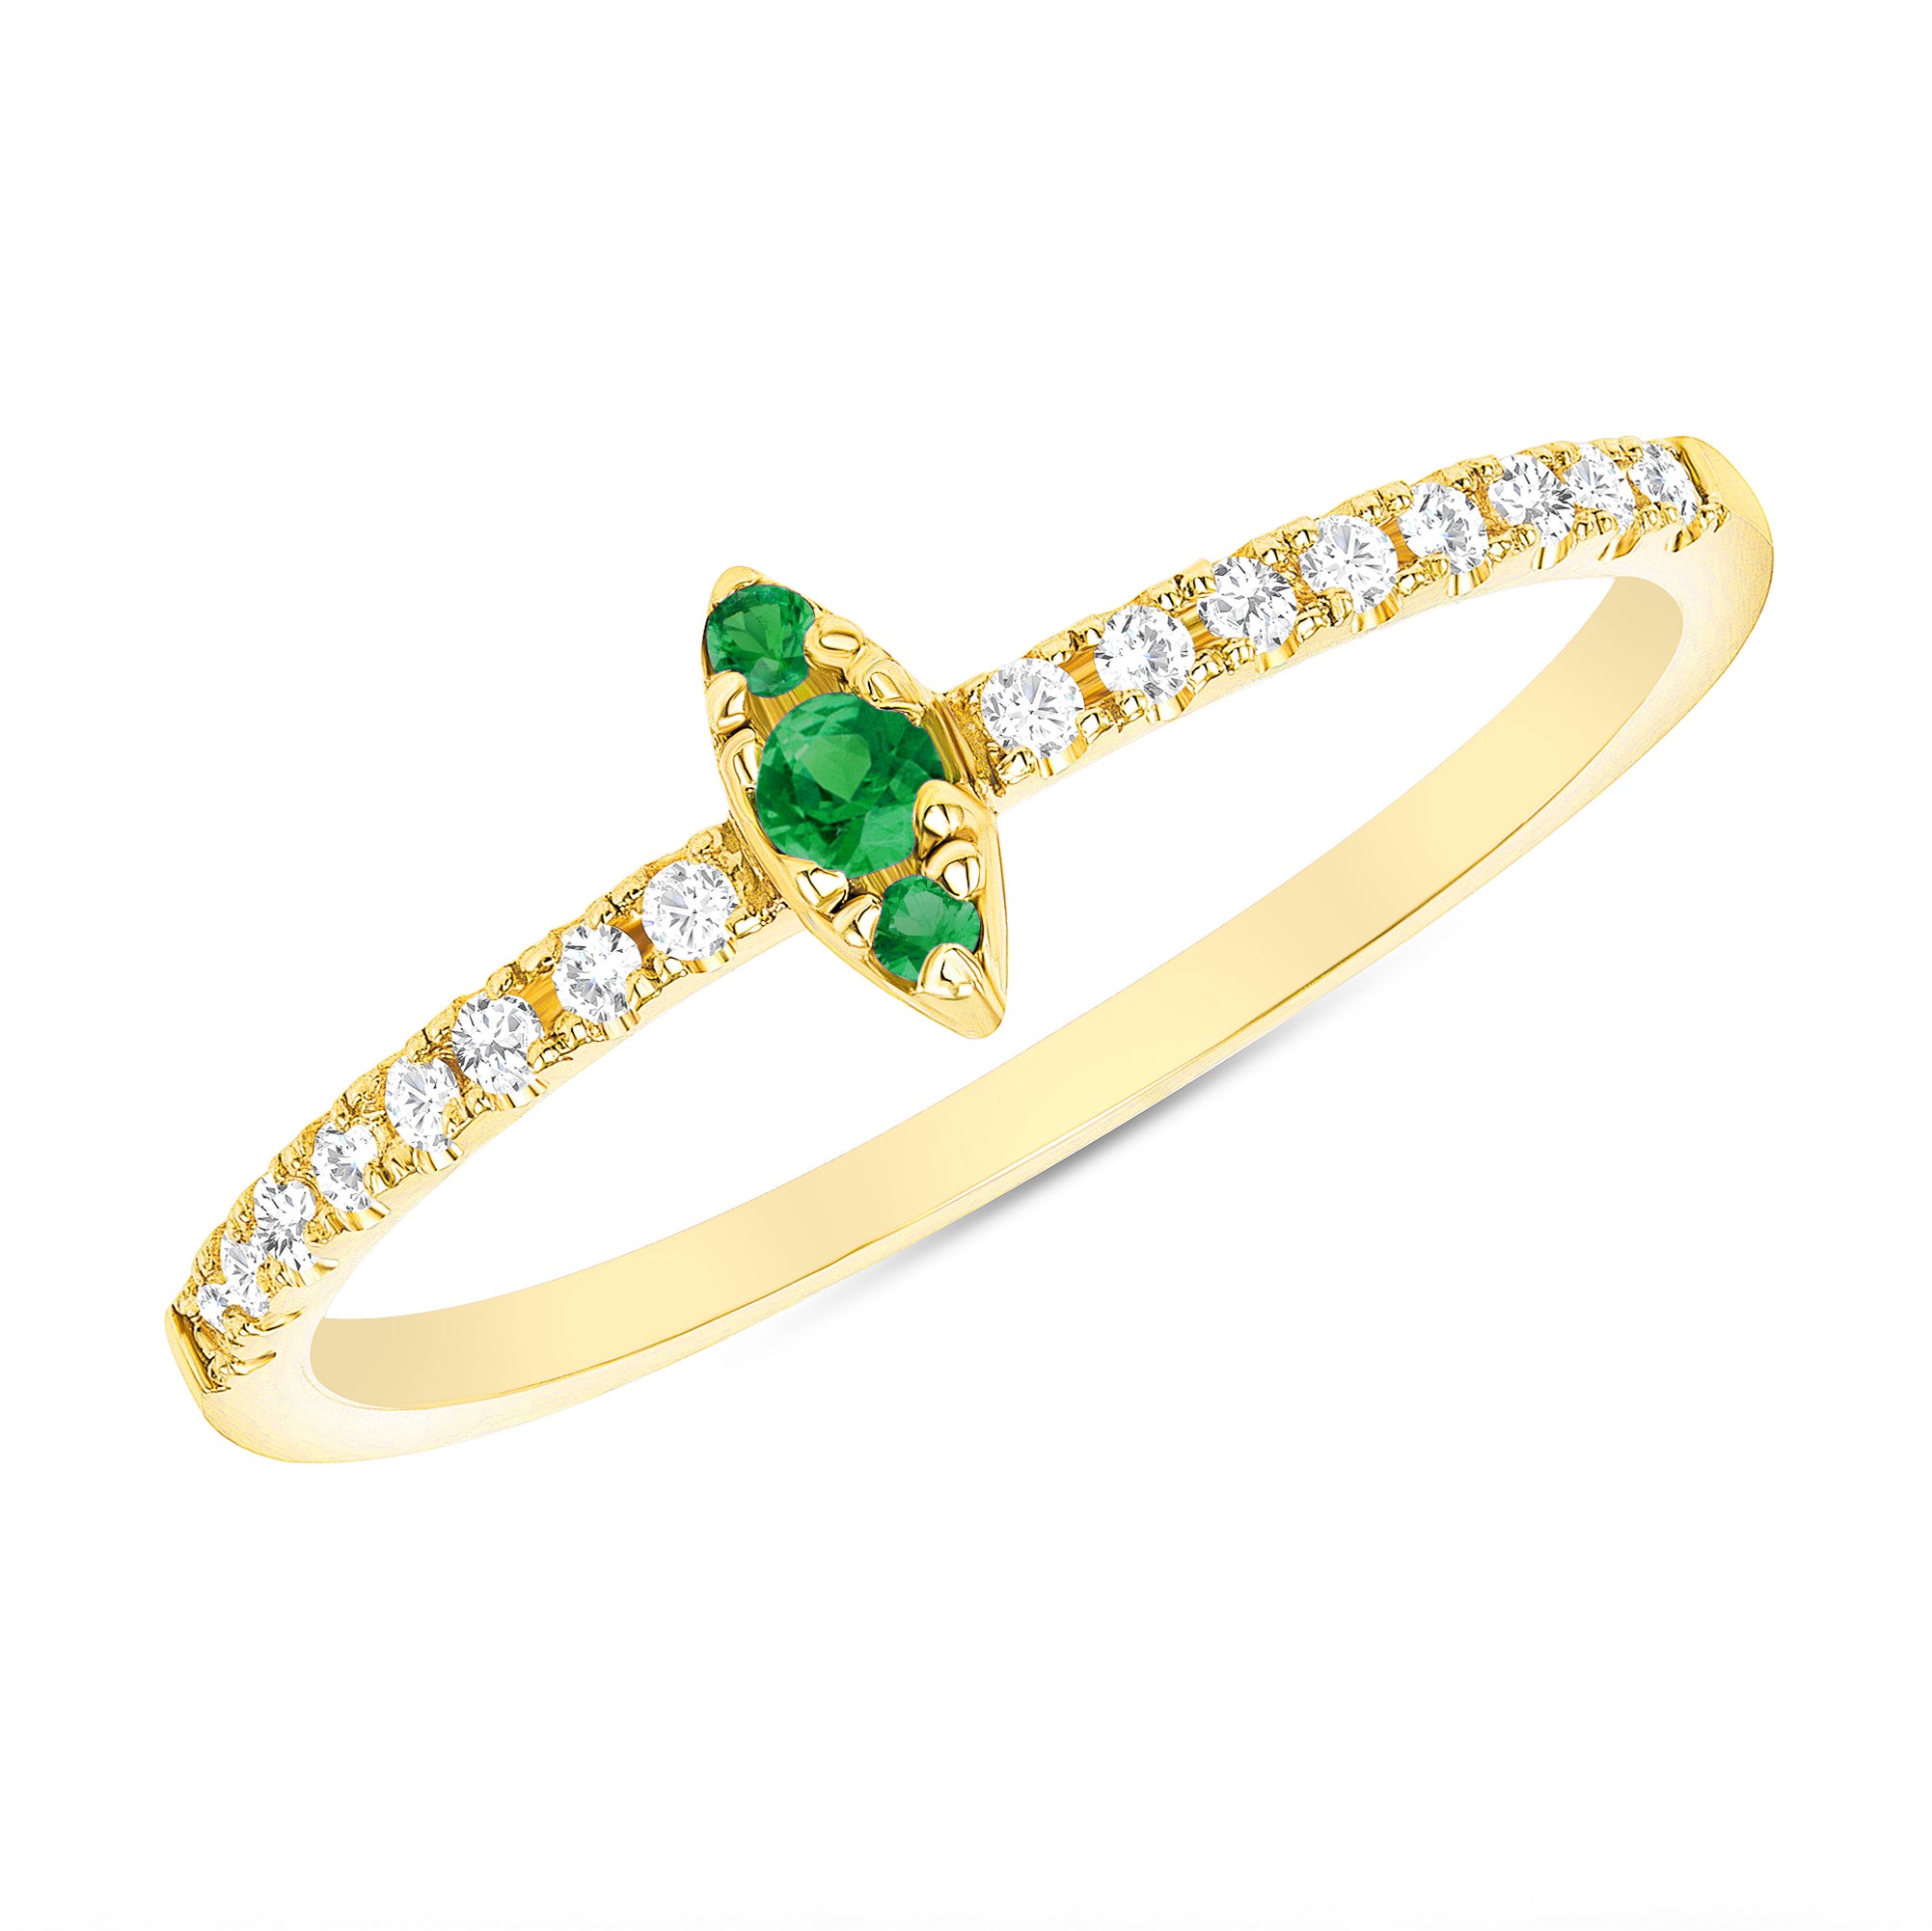 14K Gold Diamond & Emerald Marquise Design Stackable Ring,  Color Stones, ABB-123V1-EMD, Color Stones, colorstone rings, Emerald and diamond marquise design ring, emerald marquise design stacking ring, Belarino